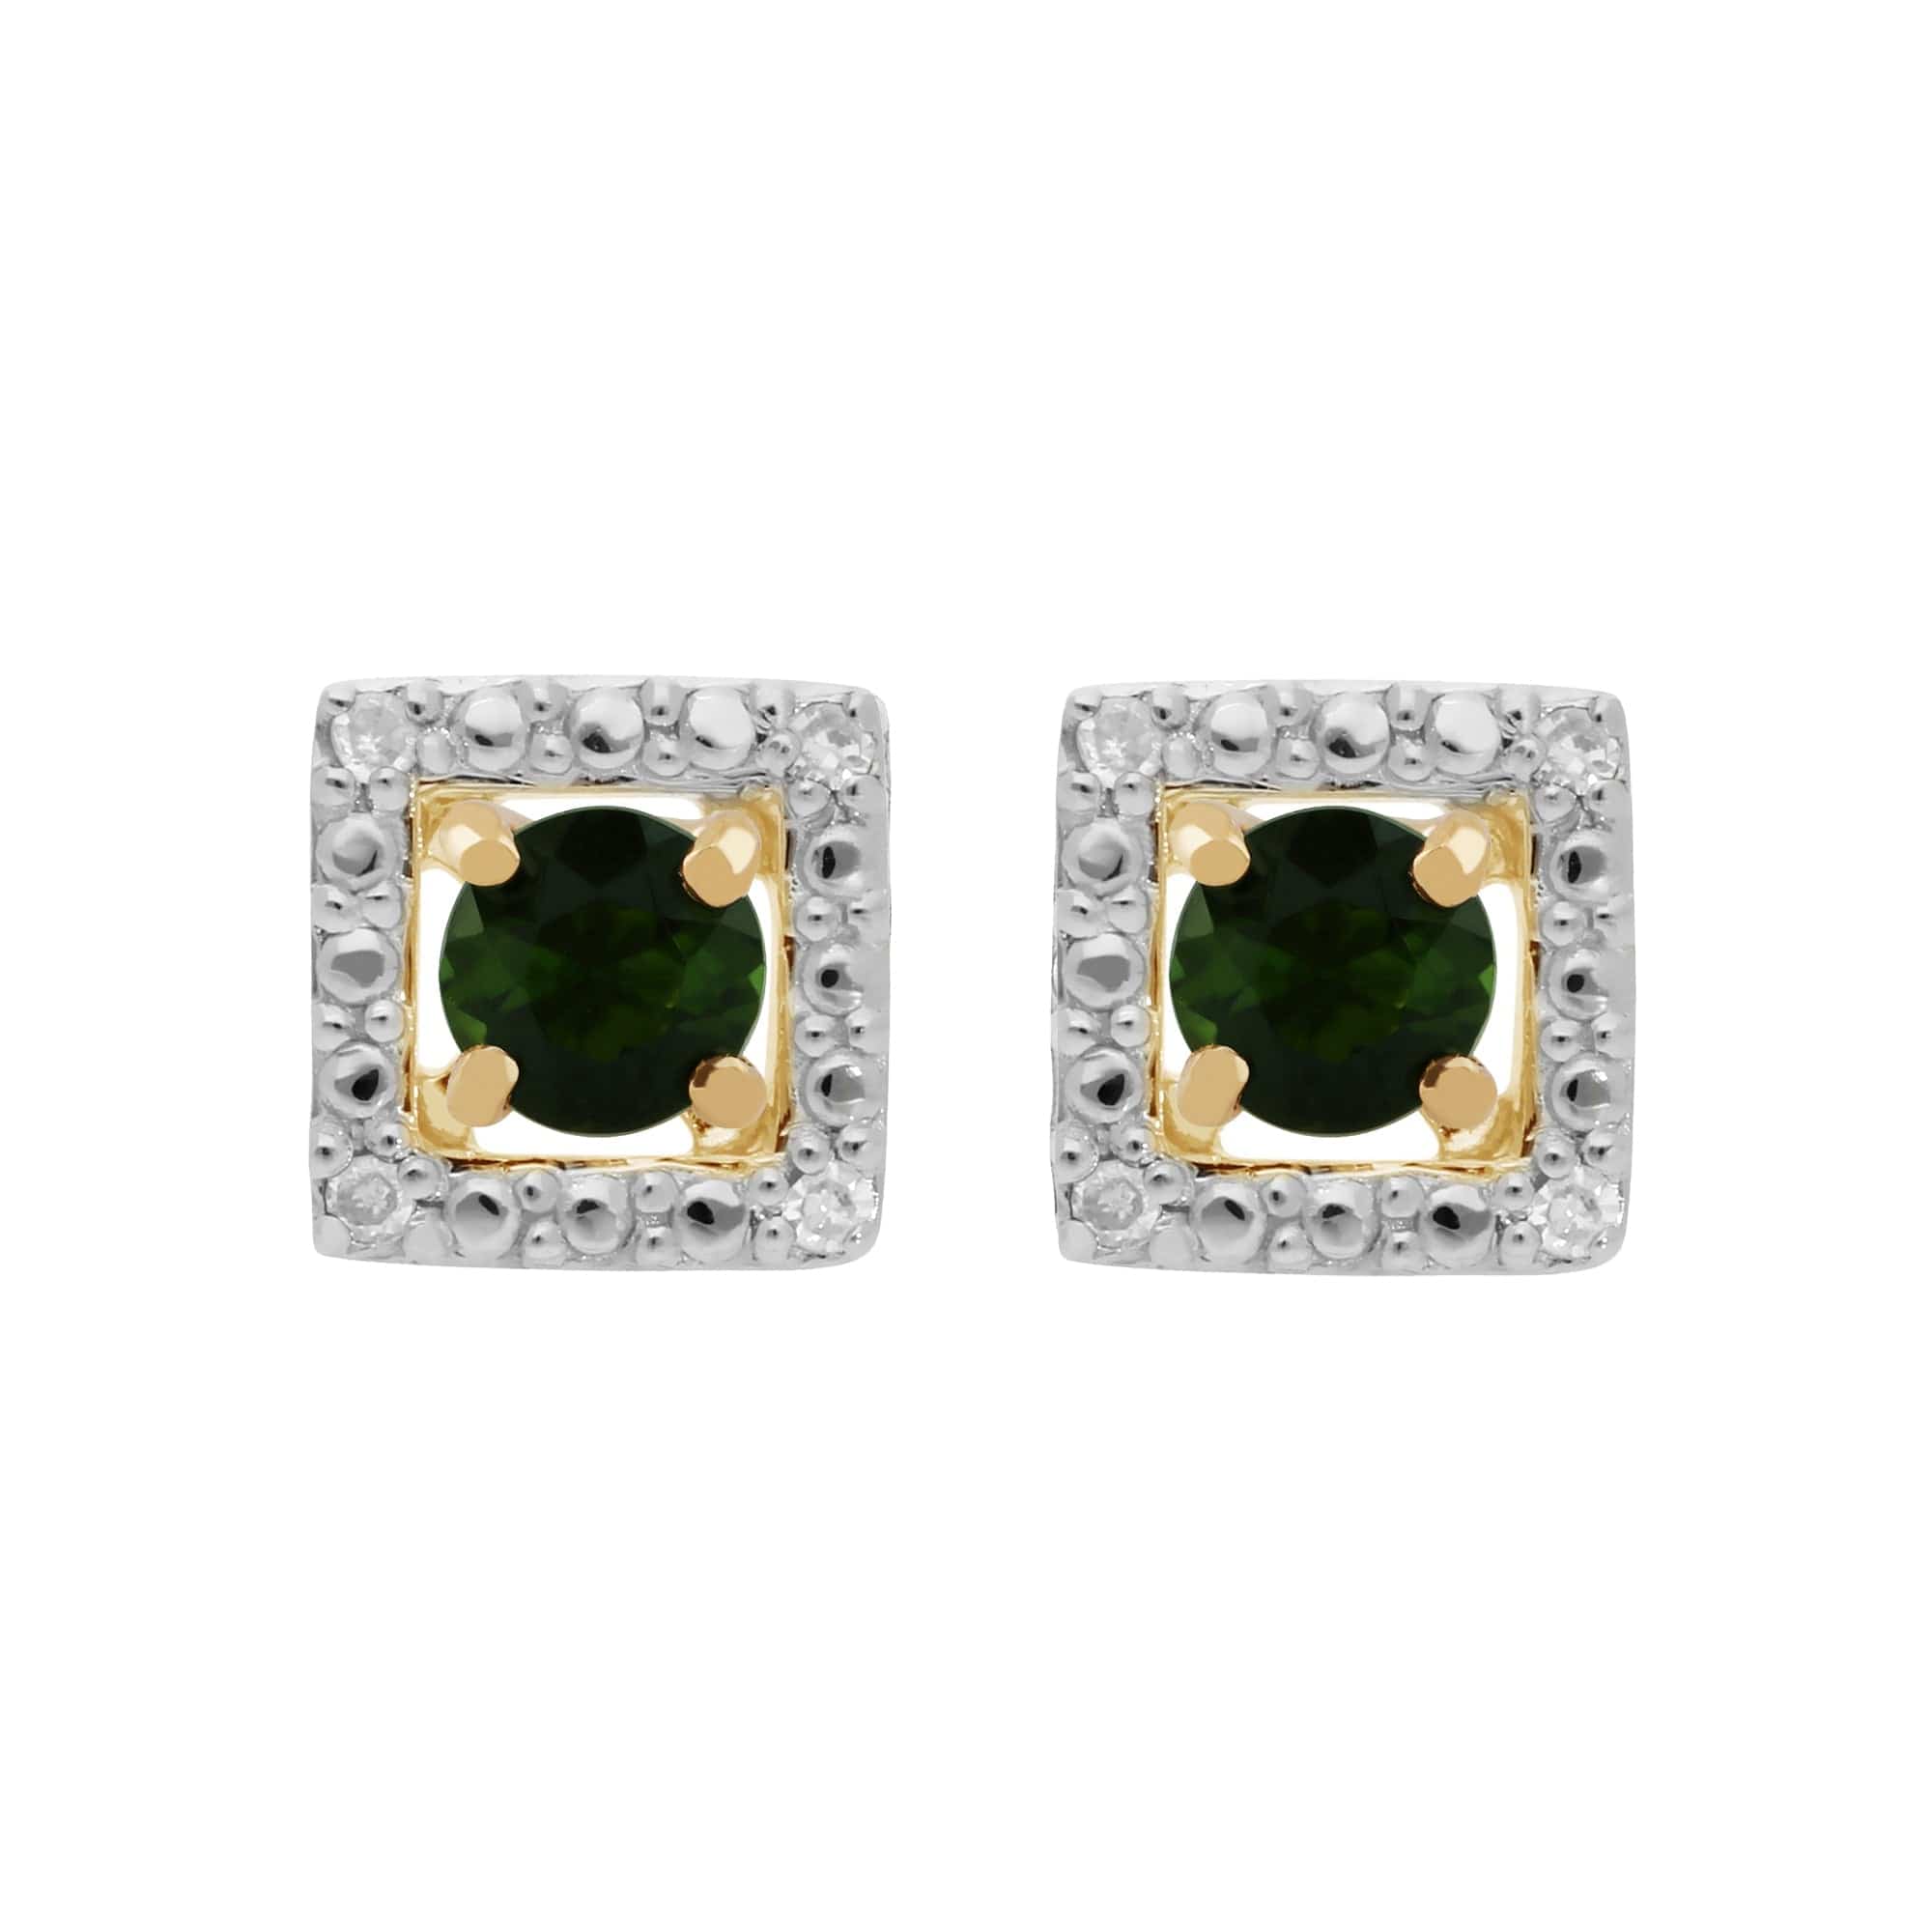 183E0083449-191E0379019 Classic Round Green Tourmaline Stud Earrings with Detachable Diamond Square Earrings Jacket Set in 9ct Yellow Gold 1